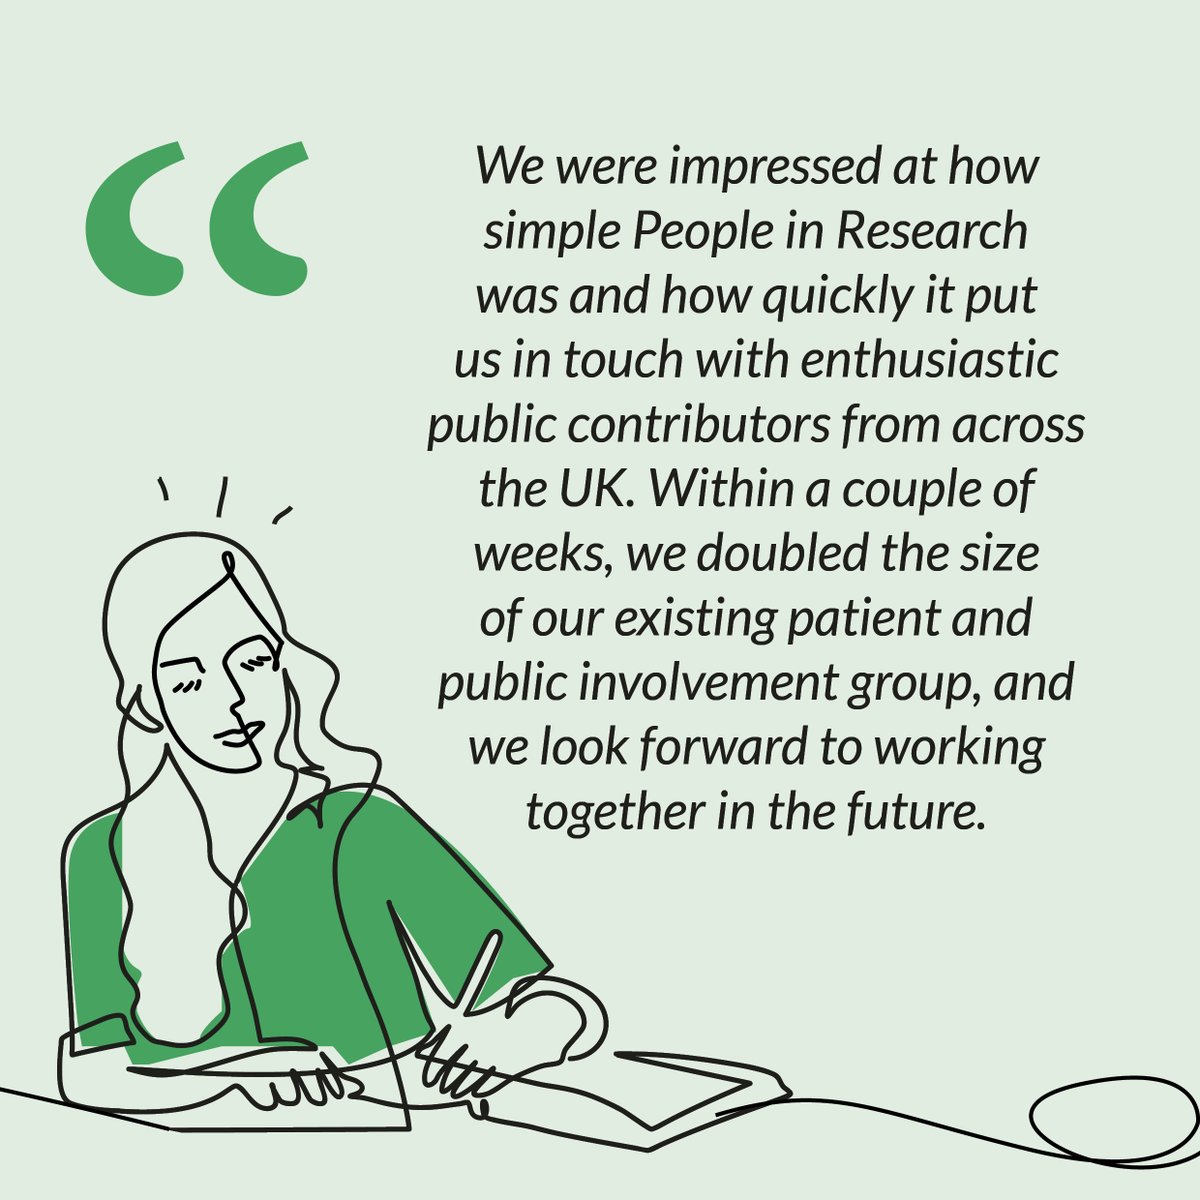 “We were impressed at how simple People in Research was to use and how quickly it put us in touch with enthusiastic public contributors” Are you looking to involve patients and the public in your research? Post your opportunity on People in Research now! peopleinresearch.org